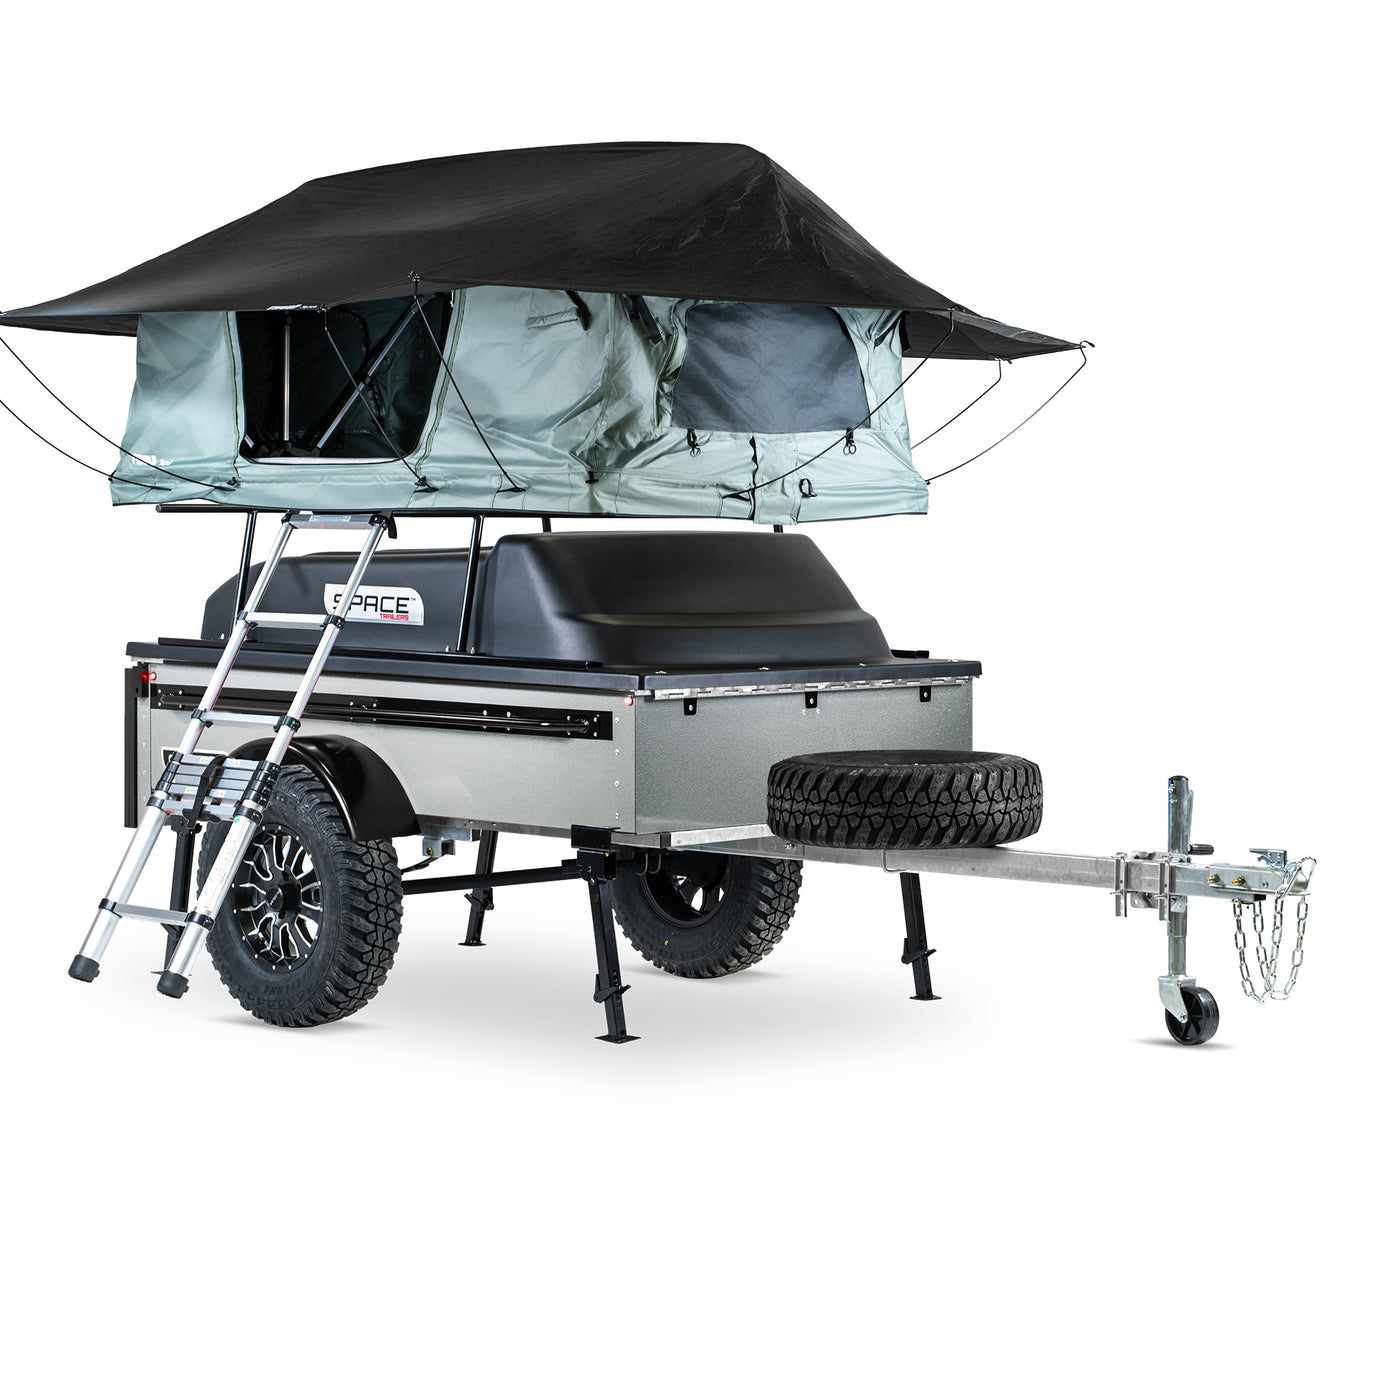 SPACE Trailer - Sport Utility Trailer - Camping Build